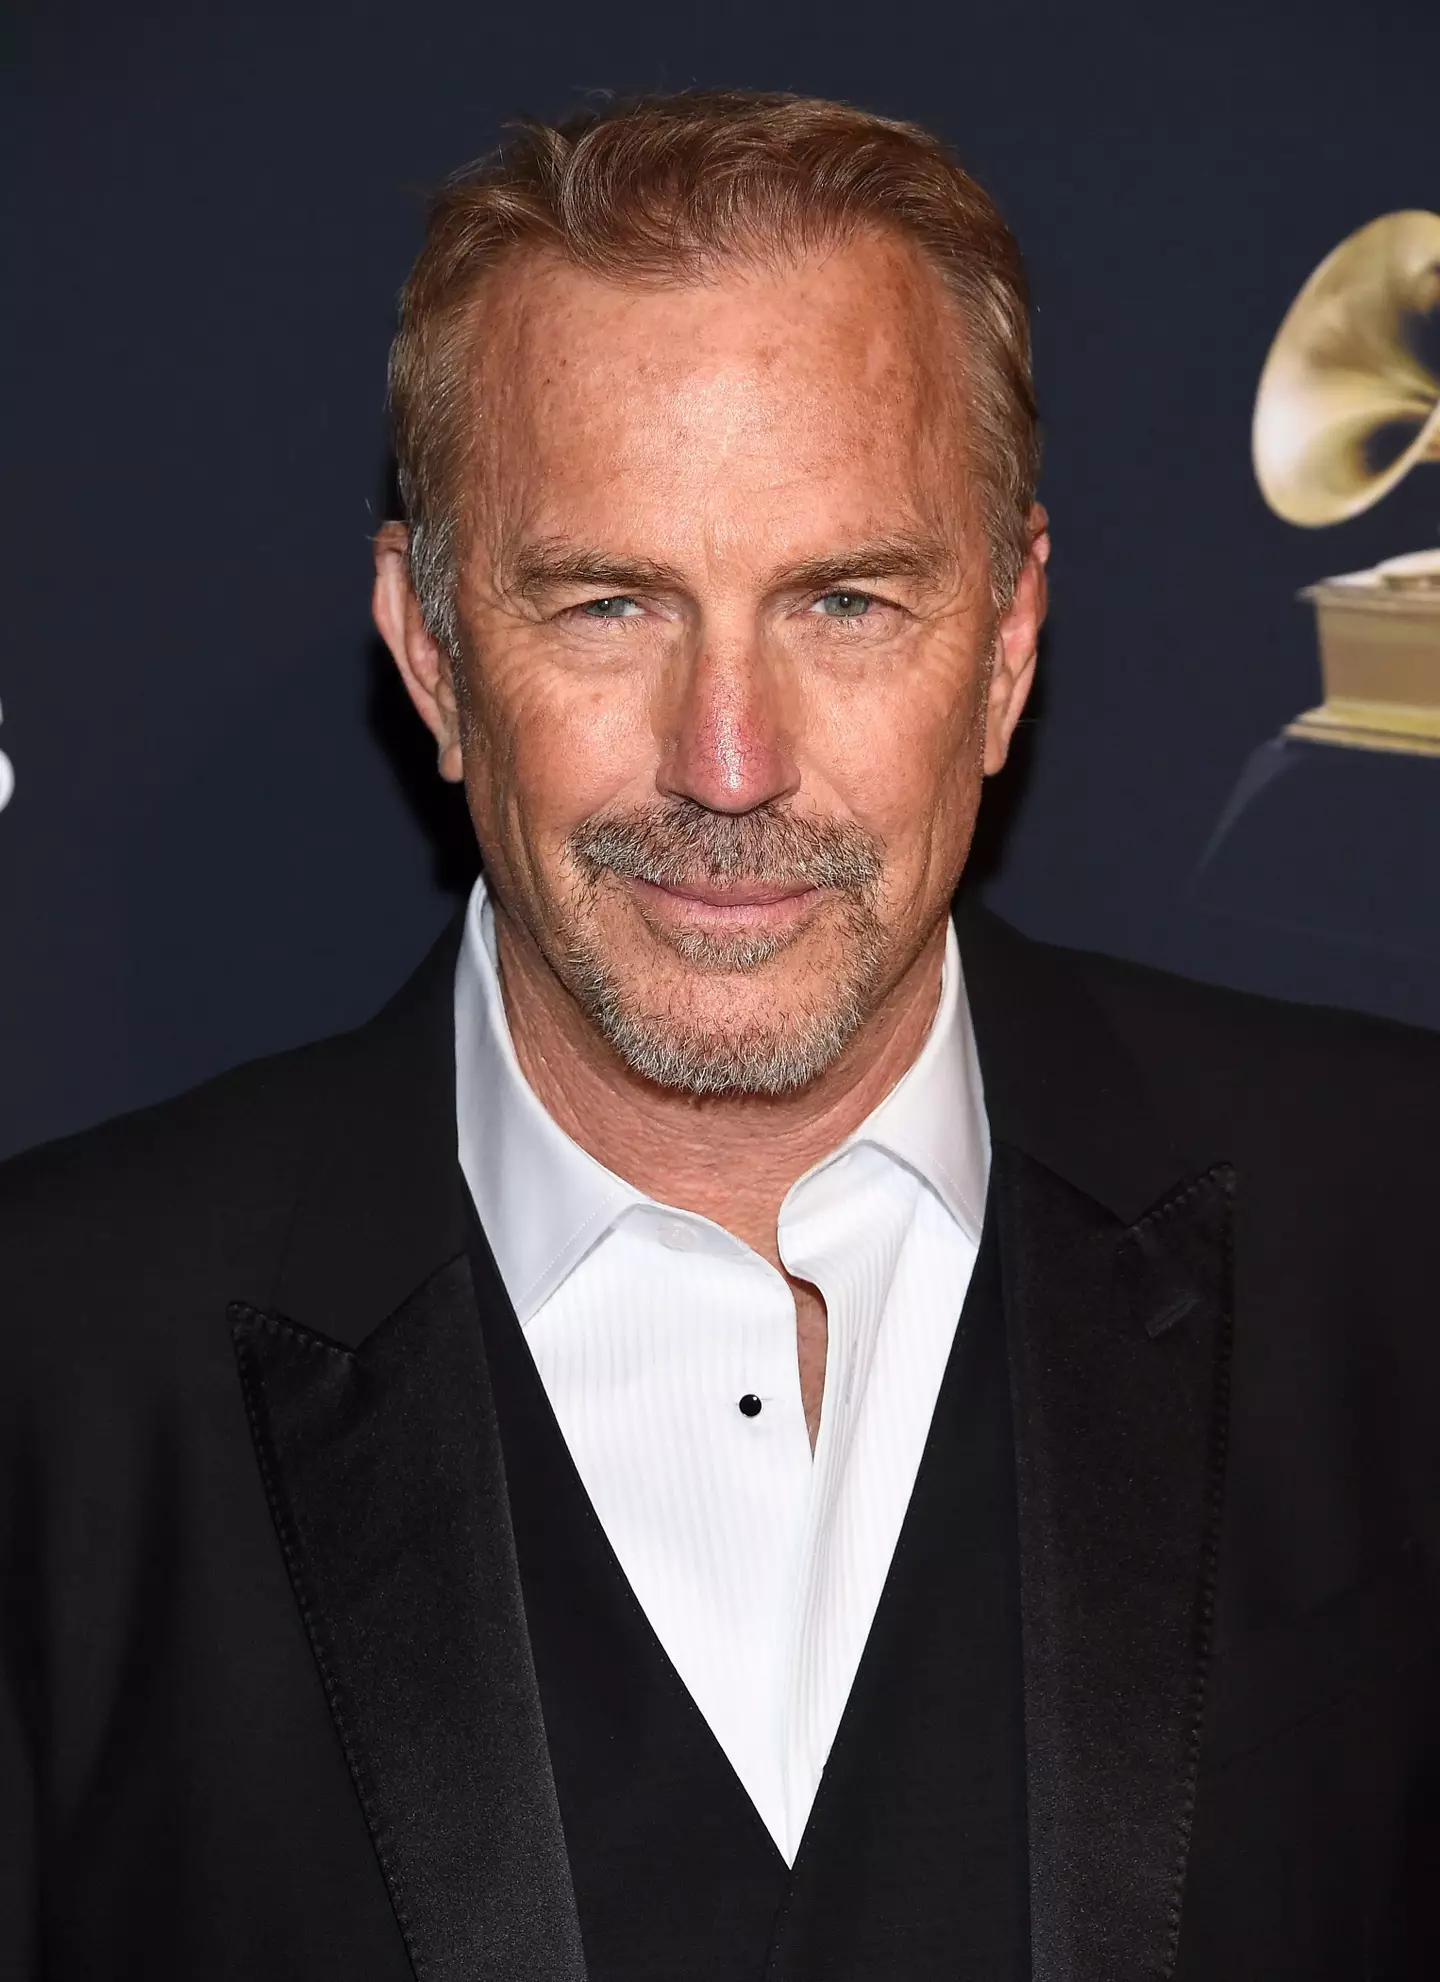 Kevin Costner wants his estranged wife to vacate their home.